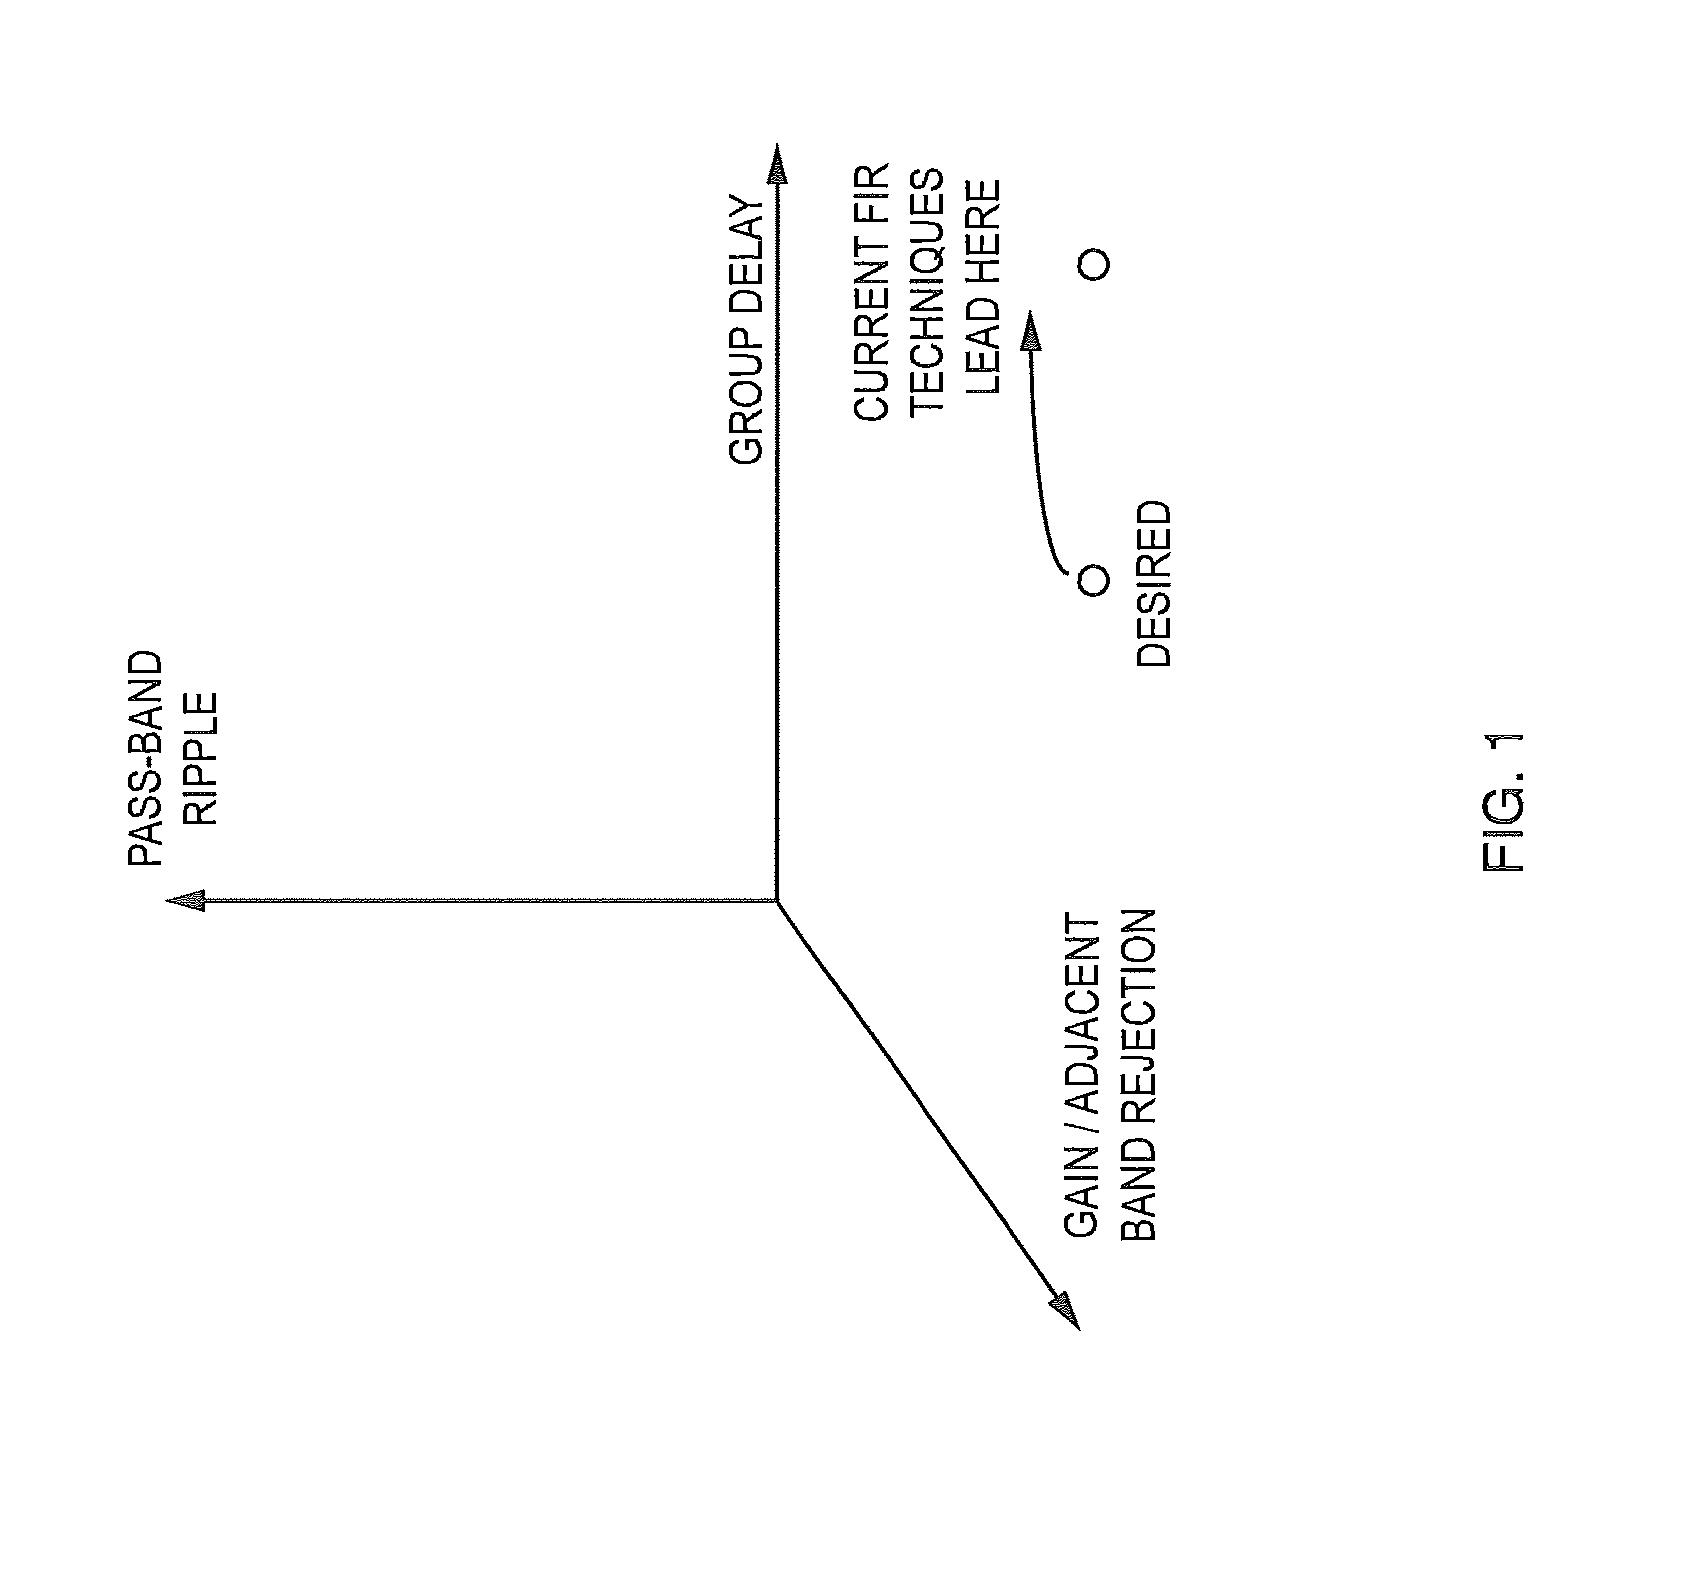 Reconfigurable variable length fir filters for optimizing performance of digital repeater